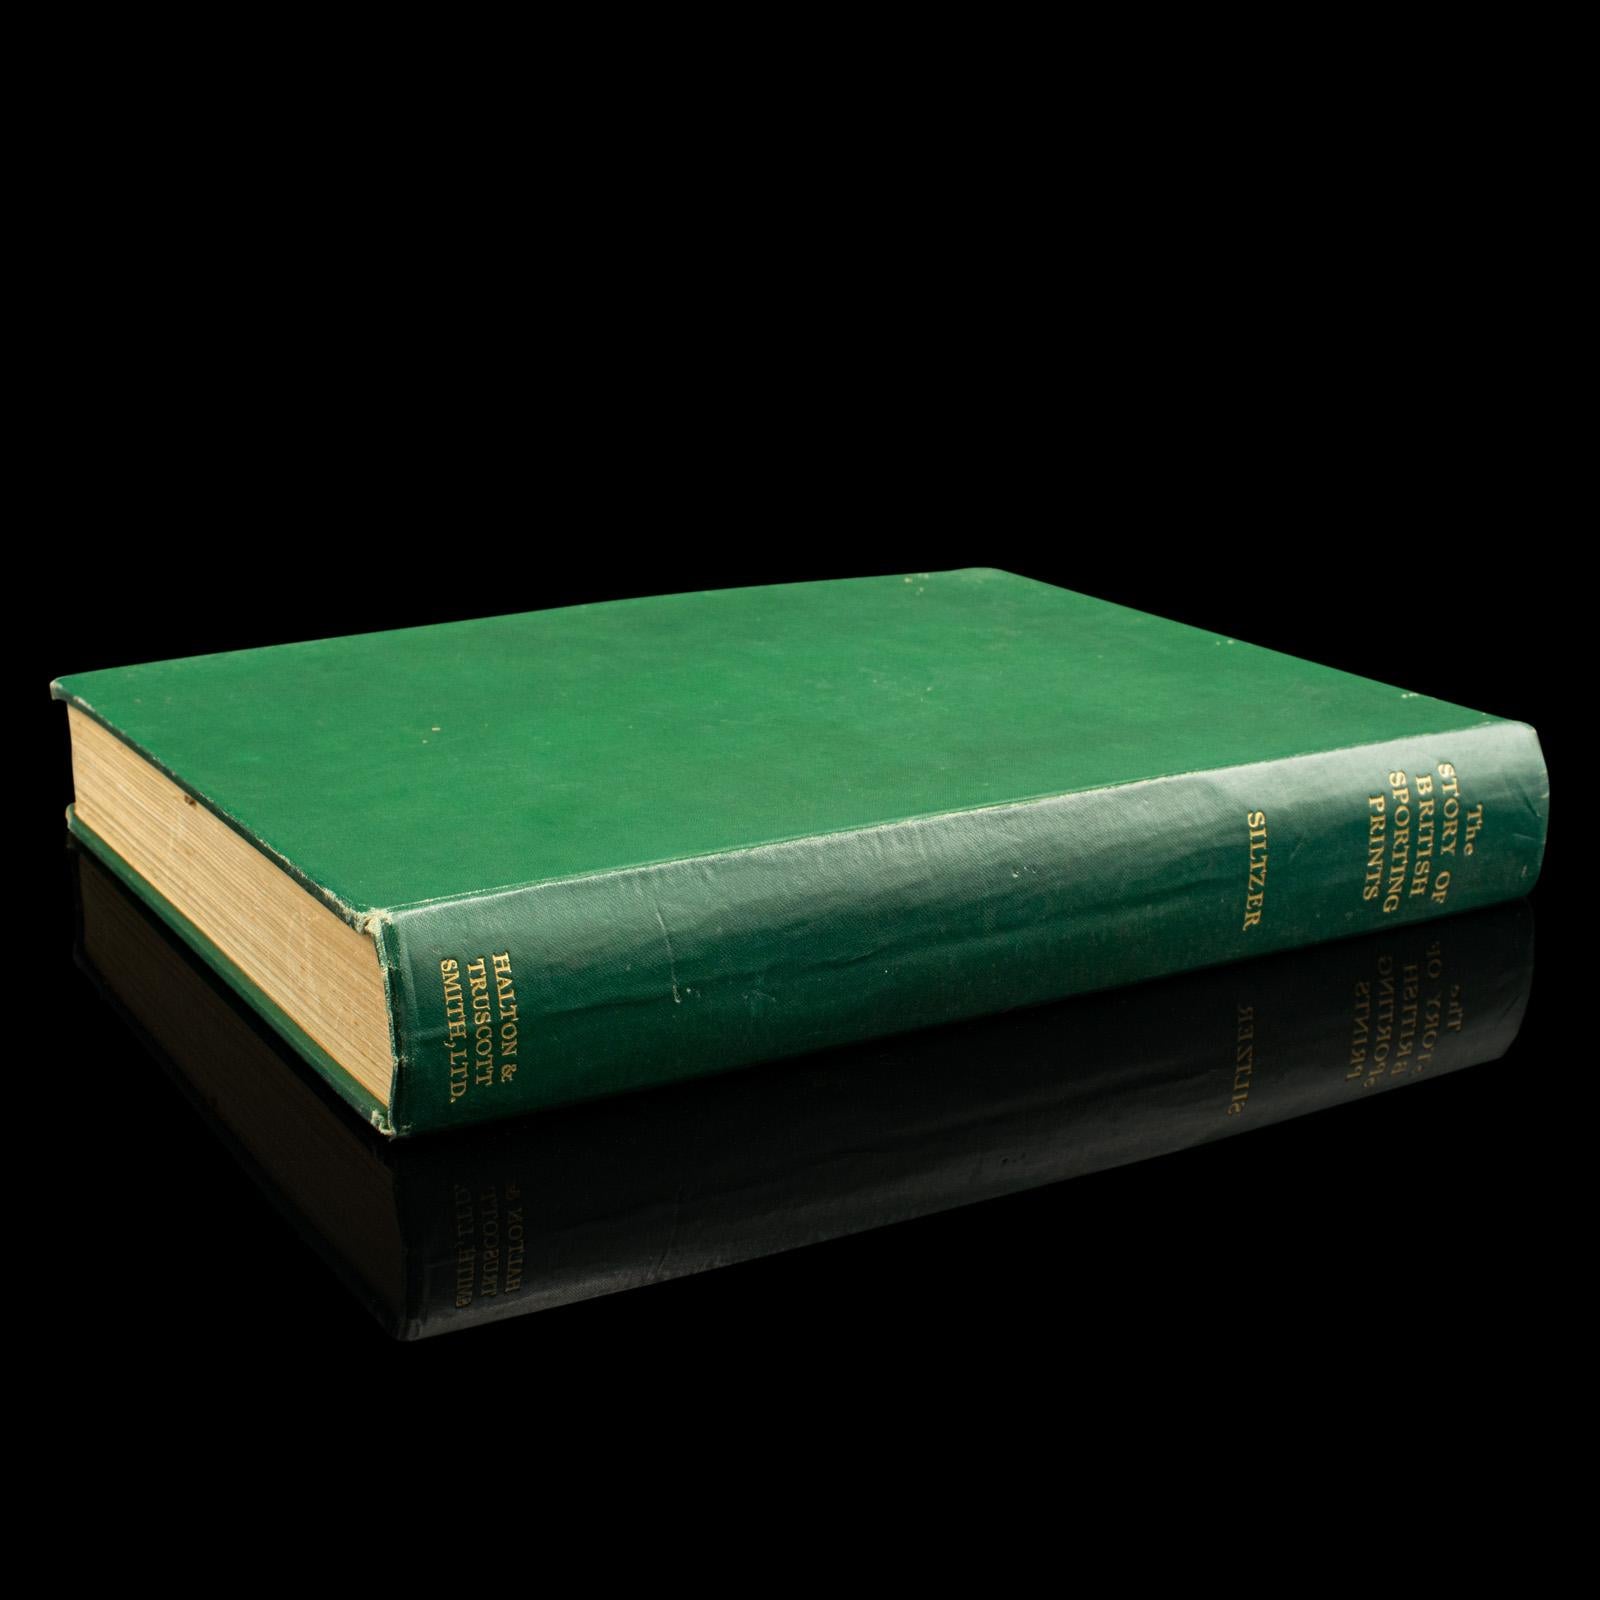 This is a large vintage book, The Story of British Sporting Prints by Captain Frank Siltzer. An English, hard bound reference book of engravings, dated to 1929.

Compiled by Captain Frank Siltzer, formerly of H.M. Grenadier Guards, as an author he